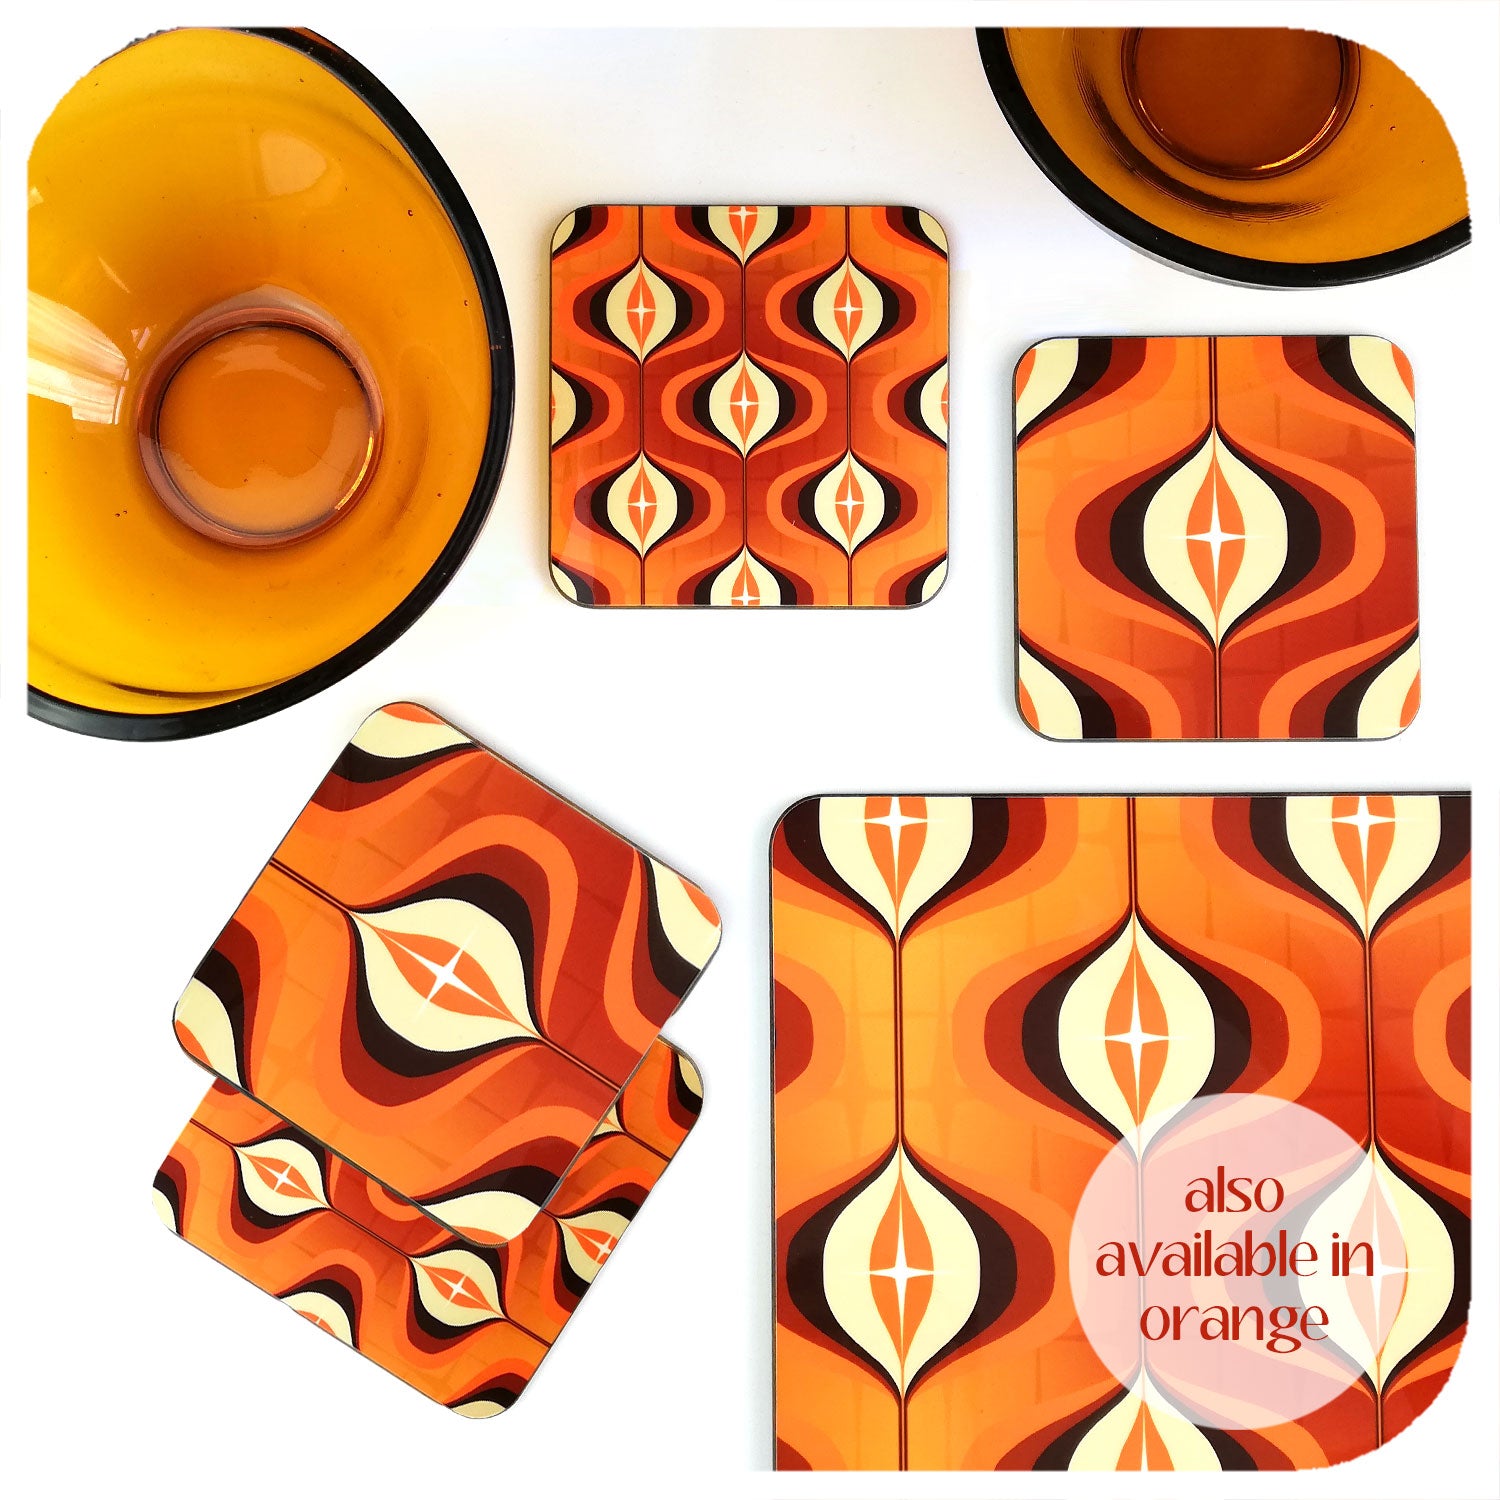 70s style Op Art Placemat & matching Coasters in Orange | The Inkabilly Emporium